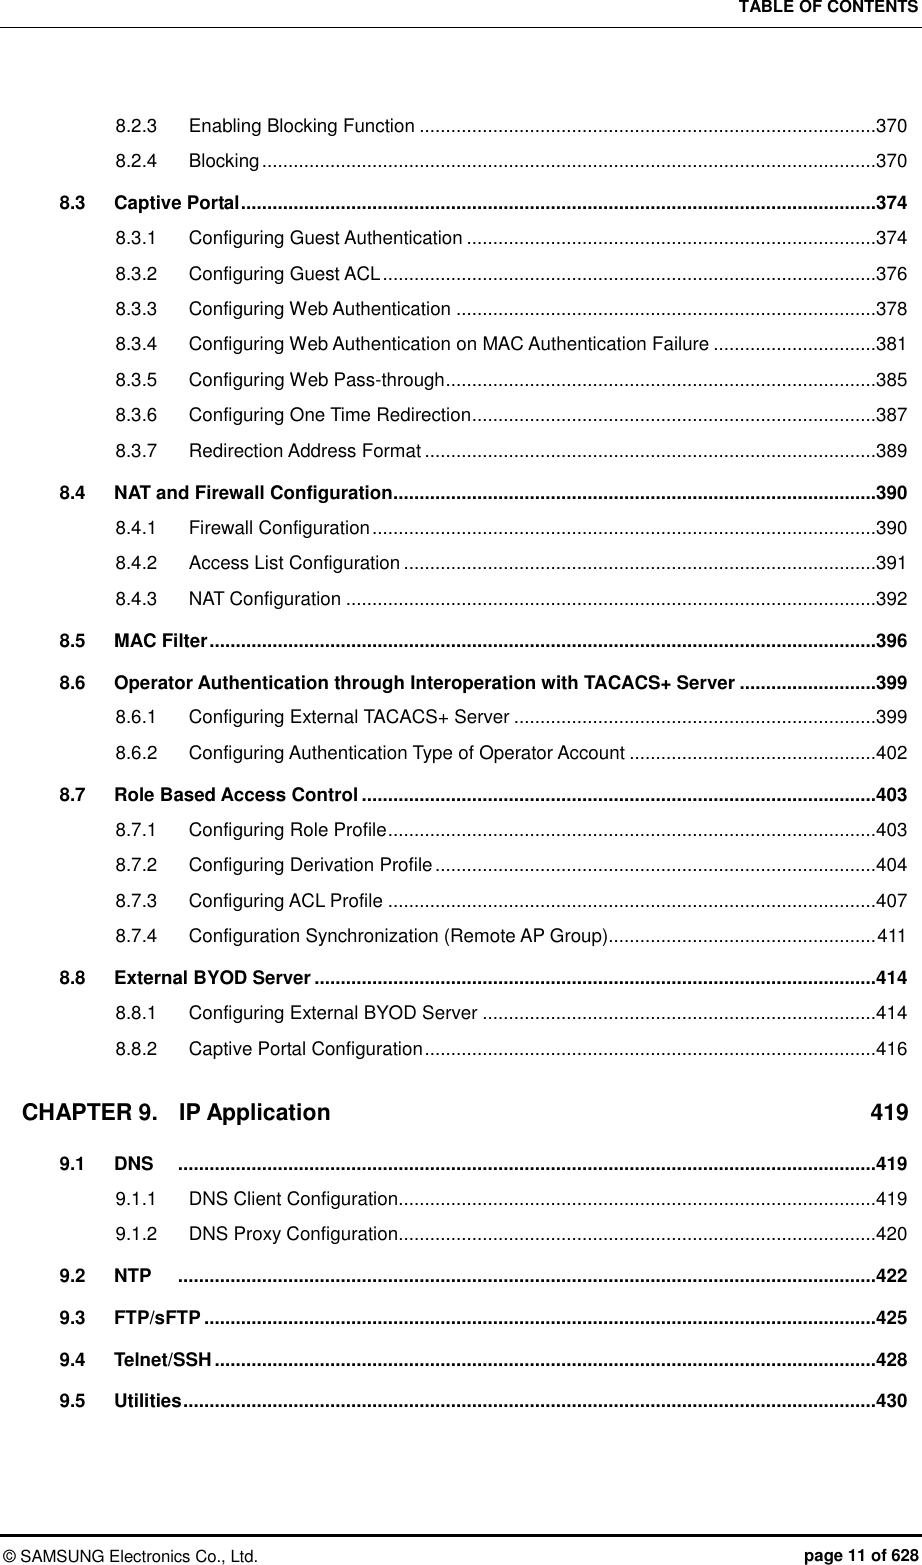 TABLE OF CONTENTS ©  SAMSUNG Electronics Co., Ltd.  page 11 of 628 8.2.3 Enabling Blocking Function .......................................................................................370 8.2.4 Blocking .....................................................................................................................370 8.3 Captive Portal .........................................................................................................................374 8.3.1 Configuring Guest Authentication ..............................................................................374 8.3.2 Configuring Guest ACL ..............................................................................................376 8.3.3 Configuring Web Authentication ................................................................................378 8.3.4 Configuring Web Authentication on MAC Authentication Failure ...............................381 8.3.5 Configuring Web Pass-through ..................................................................................385 8.3.6 Configuring One Time Redirection .............................................................................387 8.3.7 Redirection Address Format ......................................................................................389 8.4 NAT and Firewall Configuration............................................................................................390 8.4.1 Firewall Configuration ................................................................................................390 8.4.2 Access List Configuration ..........................................................................................391 8.4.3 NAT Configuration .....................................................................................................392 8.5 MAC Filter ...............................................................................................................................396 8.6 Operator Authentication through Interoperation with TACACS+ Server ..........................399 8.6.1 Configuring External TACACS+ Server .....................................................................399 8.6.2 Configuring Authentication Type of Operator Account ...............................................402 8.7 Role Based Access Control ..................................................................................................403 8.7.1 Configuring Role Profile .............................................................................................403 8.7.2 Configuring Derivation Profile ....................................................................................404 8.7.3 Configuring ACL Profile .............................................................................................407 8.7.4 Configuration Synchronization (Remote AP Group)................................................... 411 8.8 External BYOD Server ...........................................................................................................414 8.8.1 Configuring External BYOD Server ...........................................................................414 8.8.2 Captive Portal Configuration ......................................................................................416 CHAPTER 9. IP Application  419 9.1 DNS   .....................................................................................................................................419 9.1.1 DNS Client Configuration...........................................................................................419 9.1.2 DNS Proxy Configuration...........................................................................................420 9.2 NTP   .....................................................................................................................................422 9.3 FTP/sFTP ................................................................................................................................425 9.4 Telnet/SSH ..............................................................................................................................428 9.5 Utilities ....................................................................................................................................430 